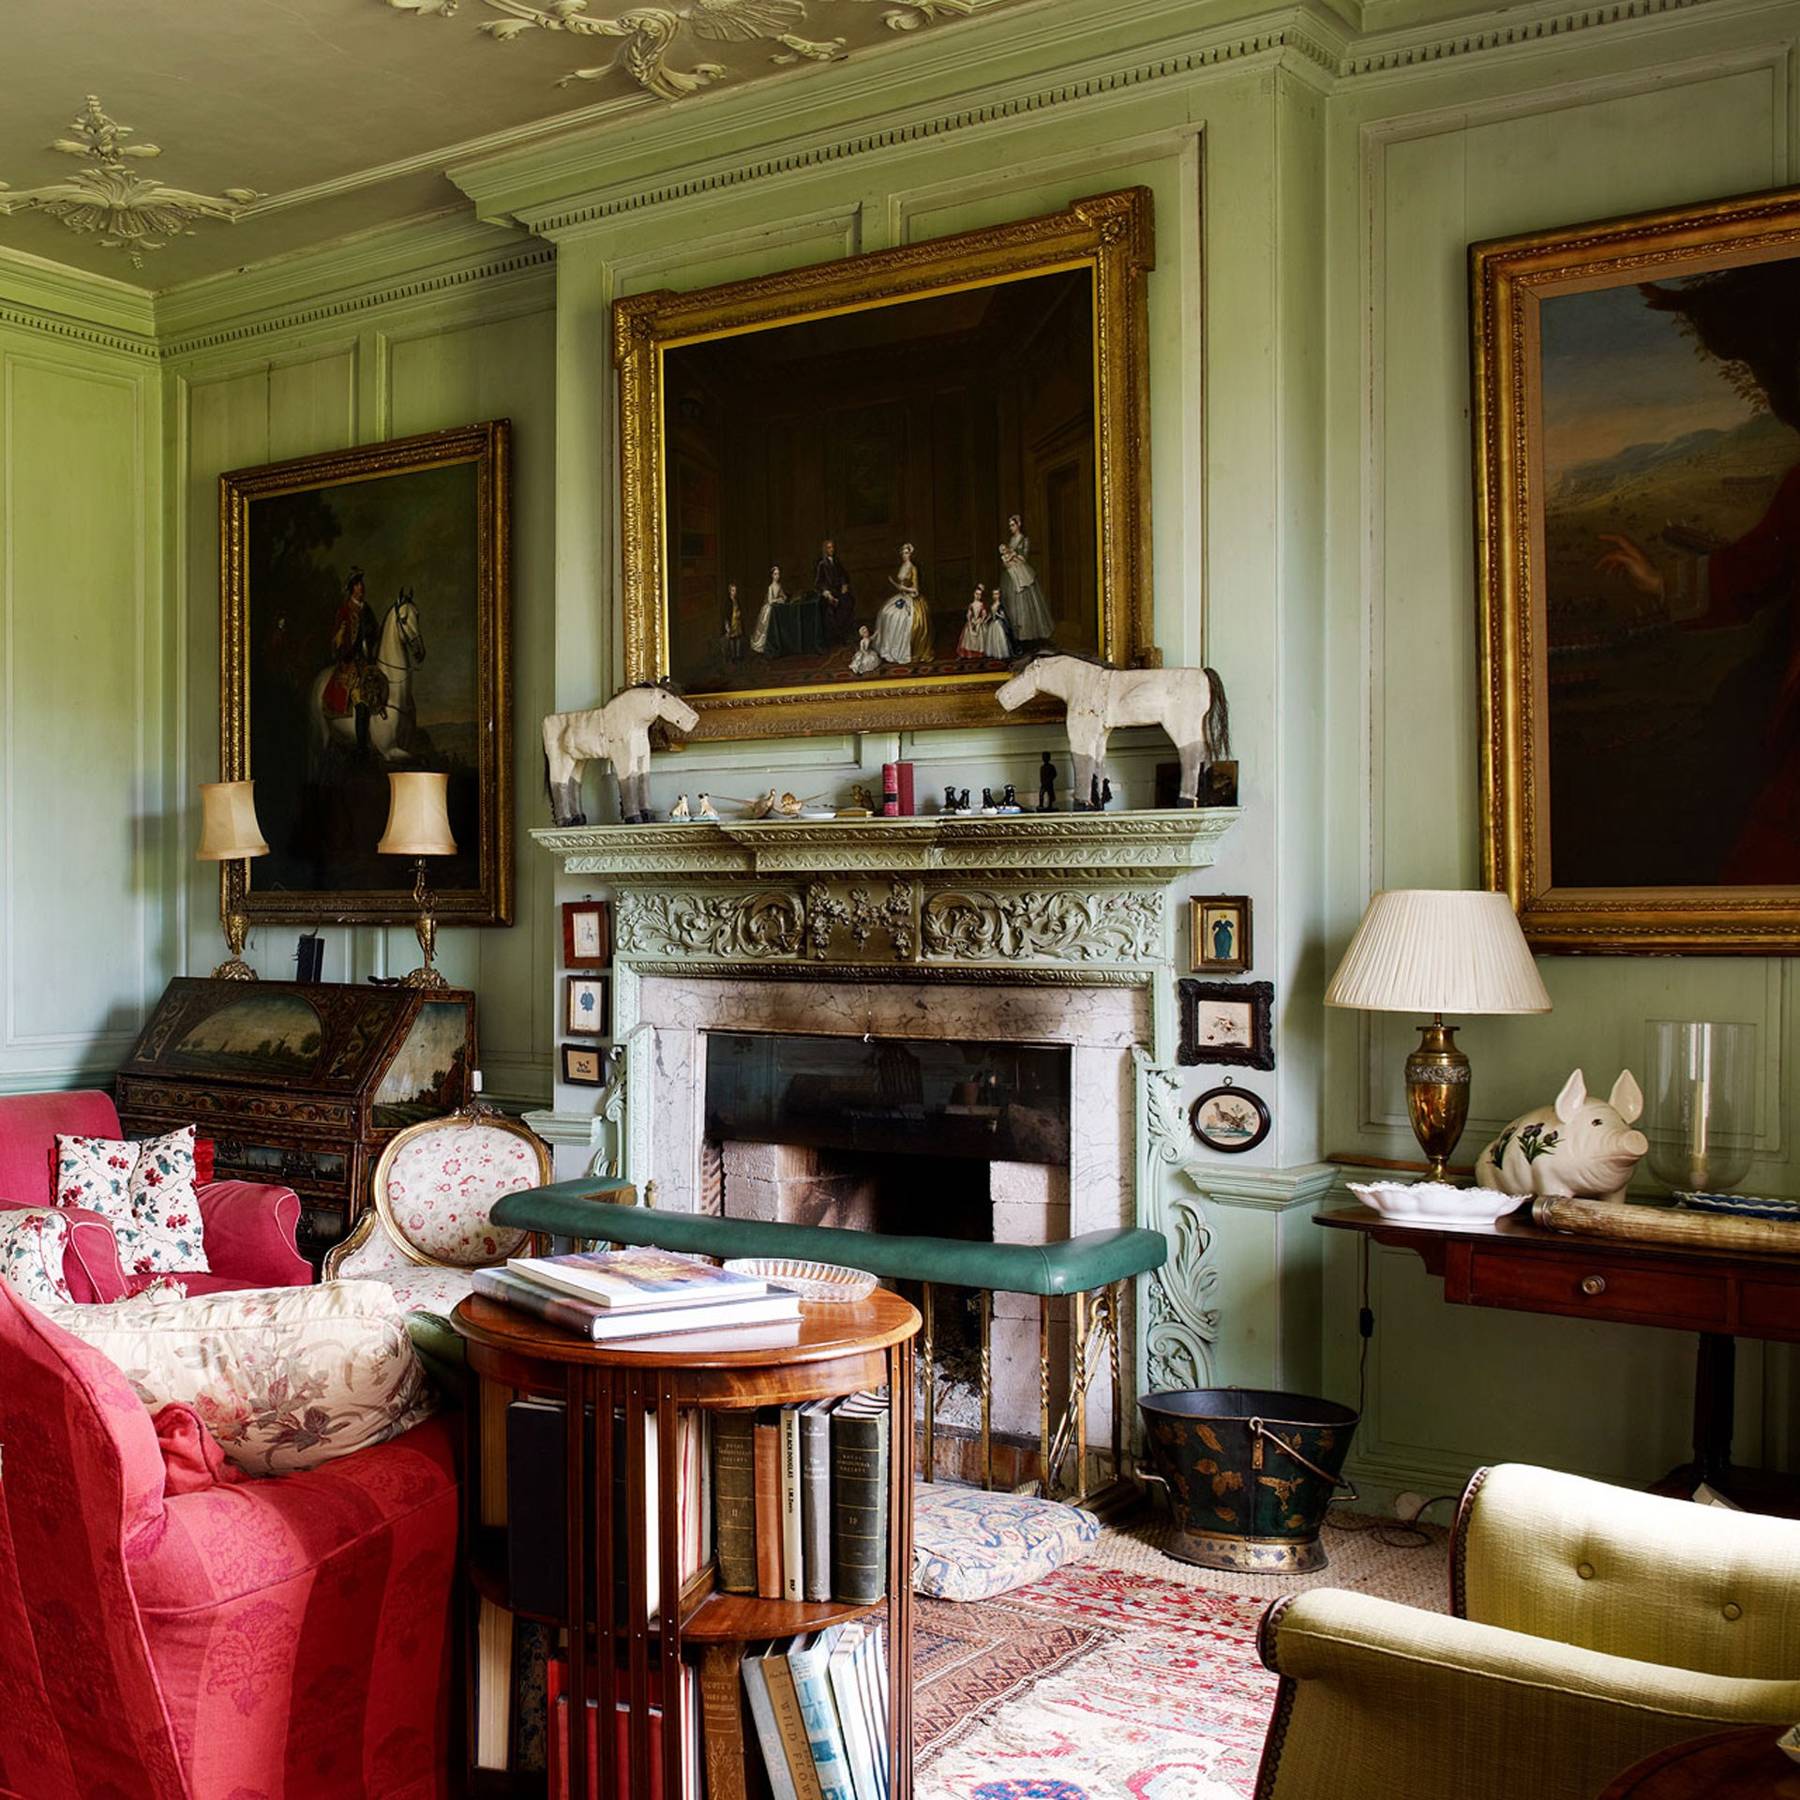 English Country House Interiors